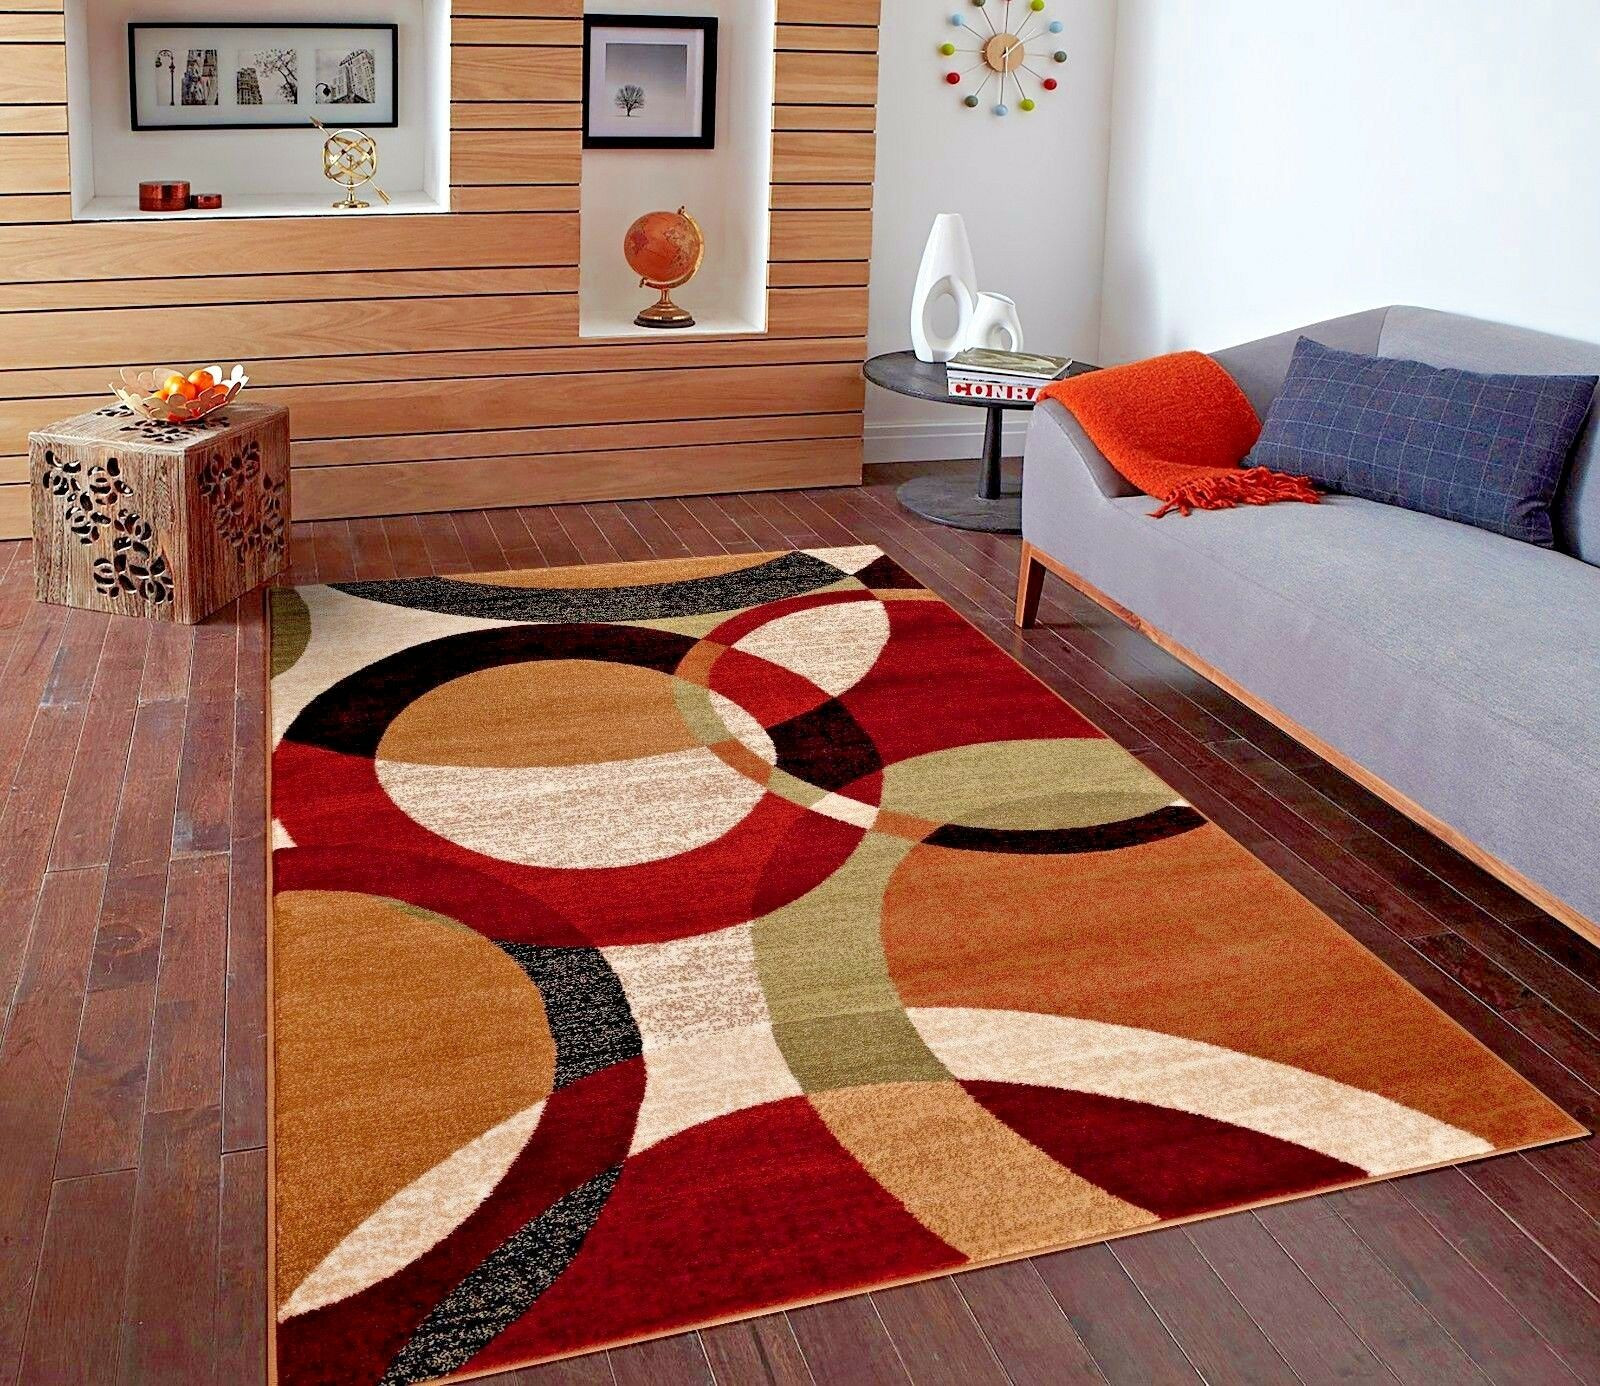 Oversized Rugs For Living Room
 RUGS AREA RUGS 8X10 AREA RUG CARPET MODERN RUGS LARGE AREA